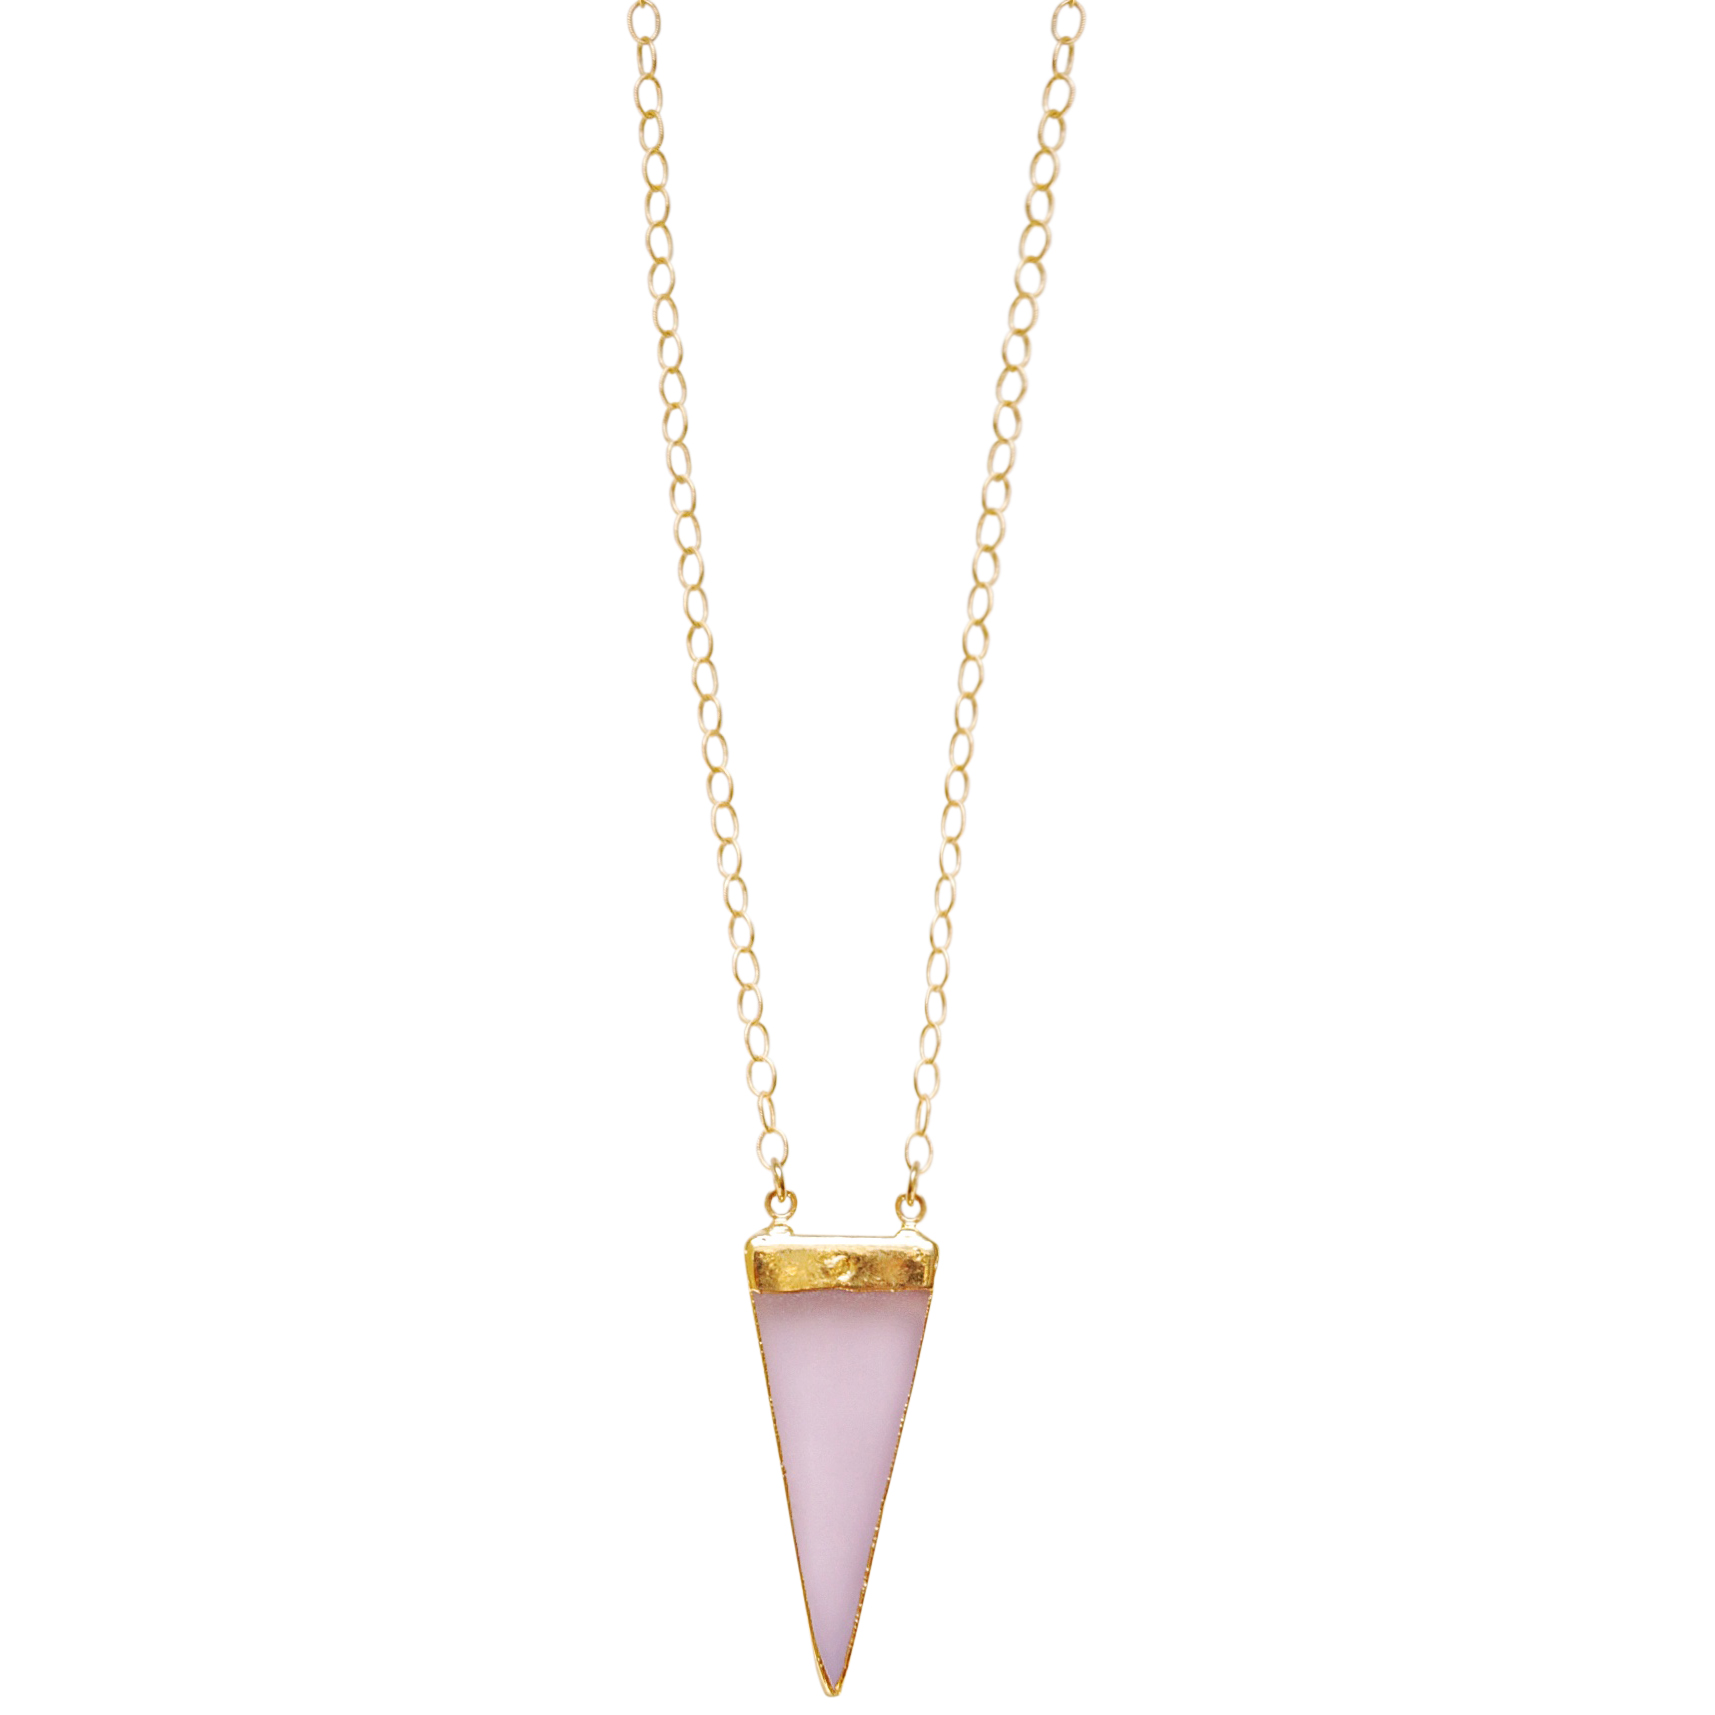 Pretty in Pink Necklace.JPG